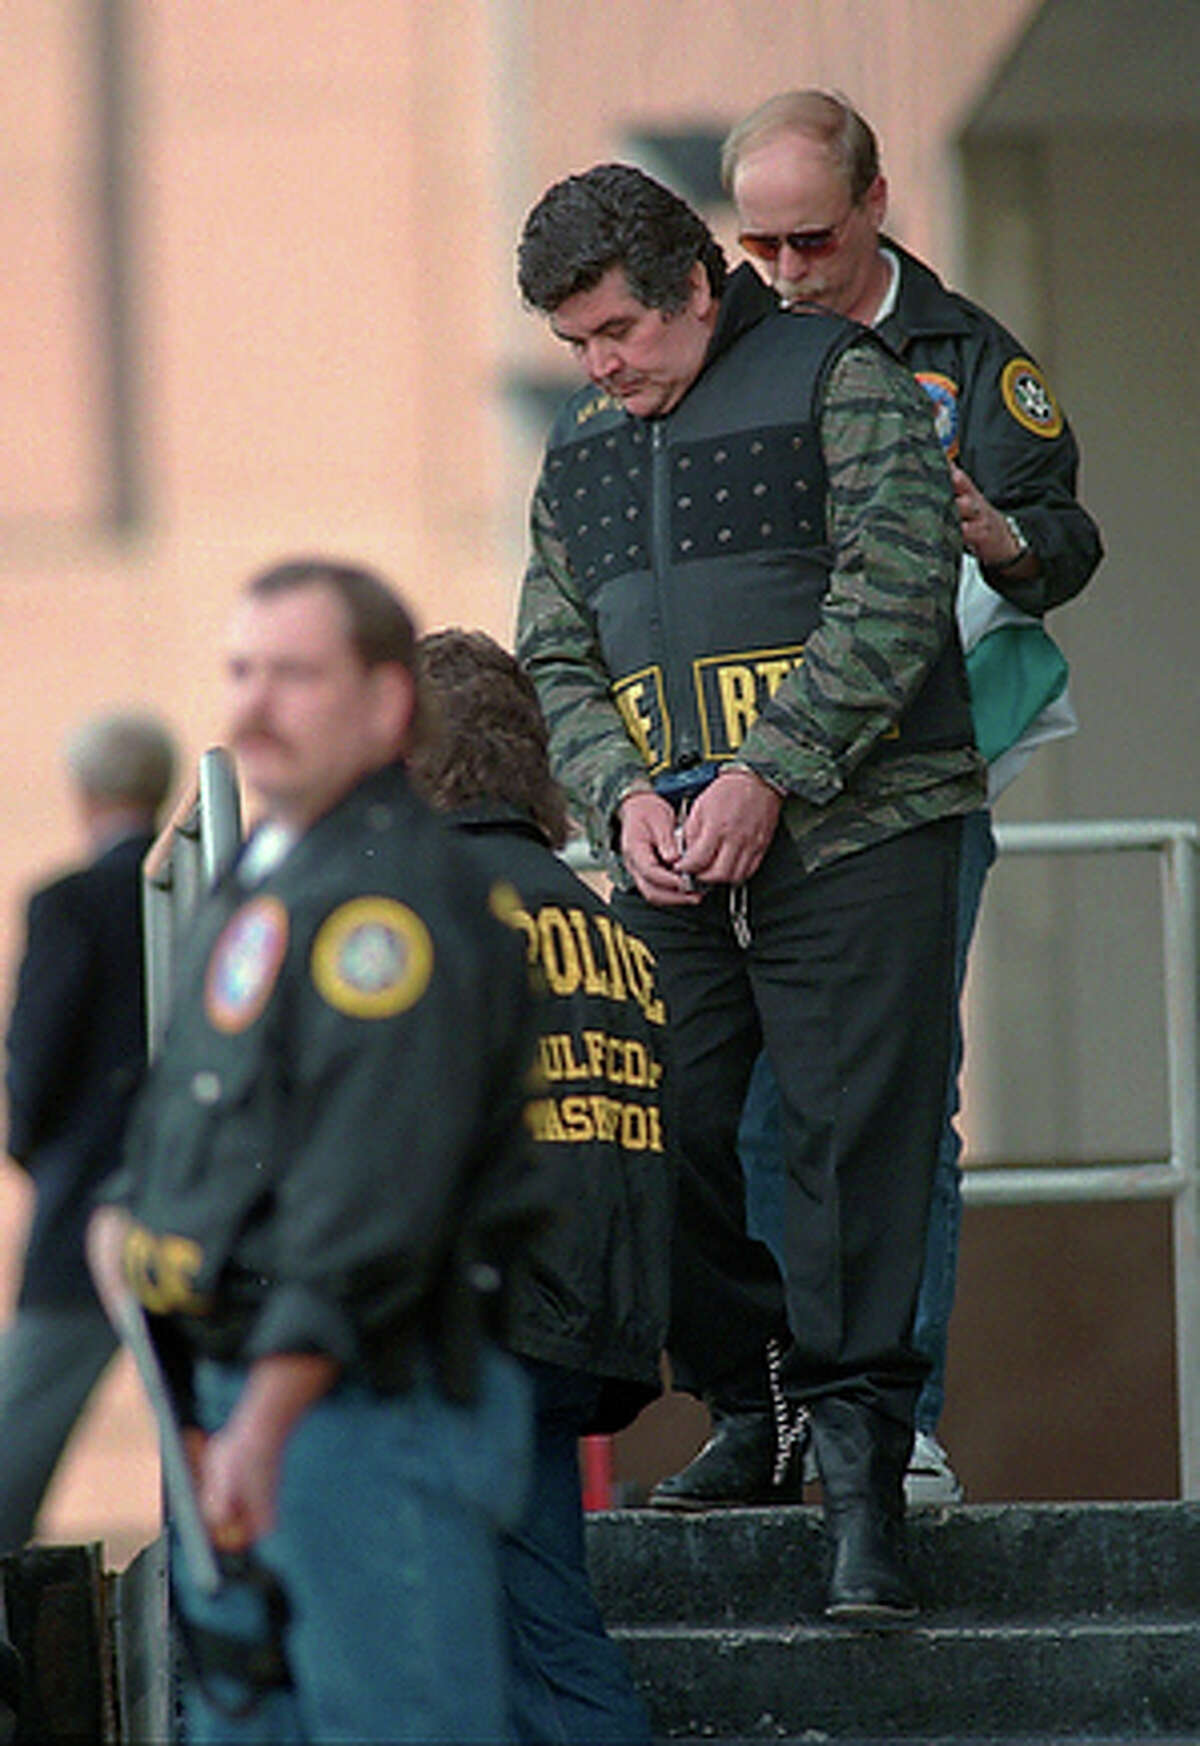 Juan Garcia Abrego , known as "El Senor" among other names, was the first Mexican drug boss to make the FBI's Ten Most Wanted list. He refused offers for a deal, was found guilty in a Houston courtroom on an array of conspiracy, drug trafficking and money laundering charges. He is serving multiple life sentences in the federal Supermax in Colorado.